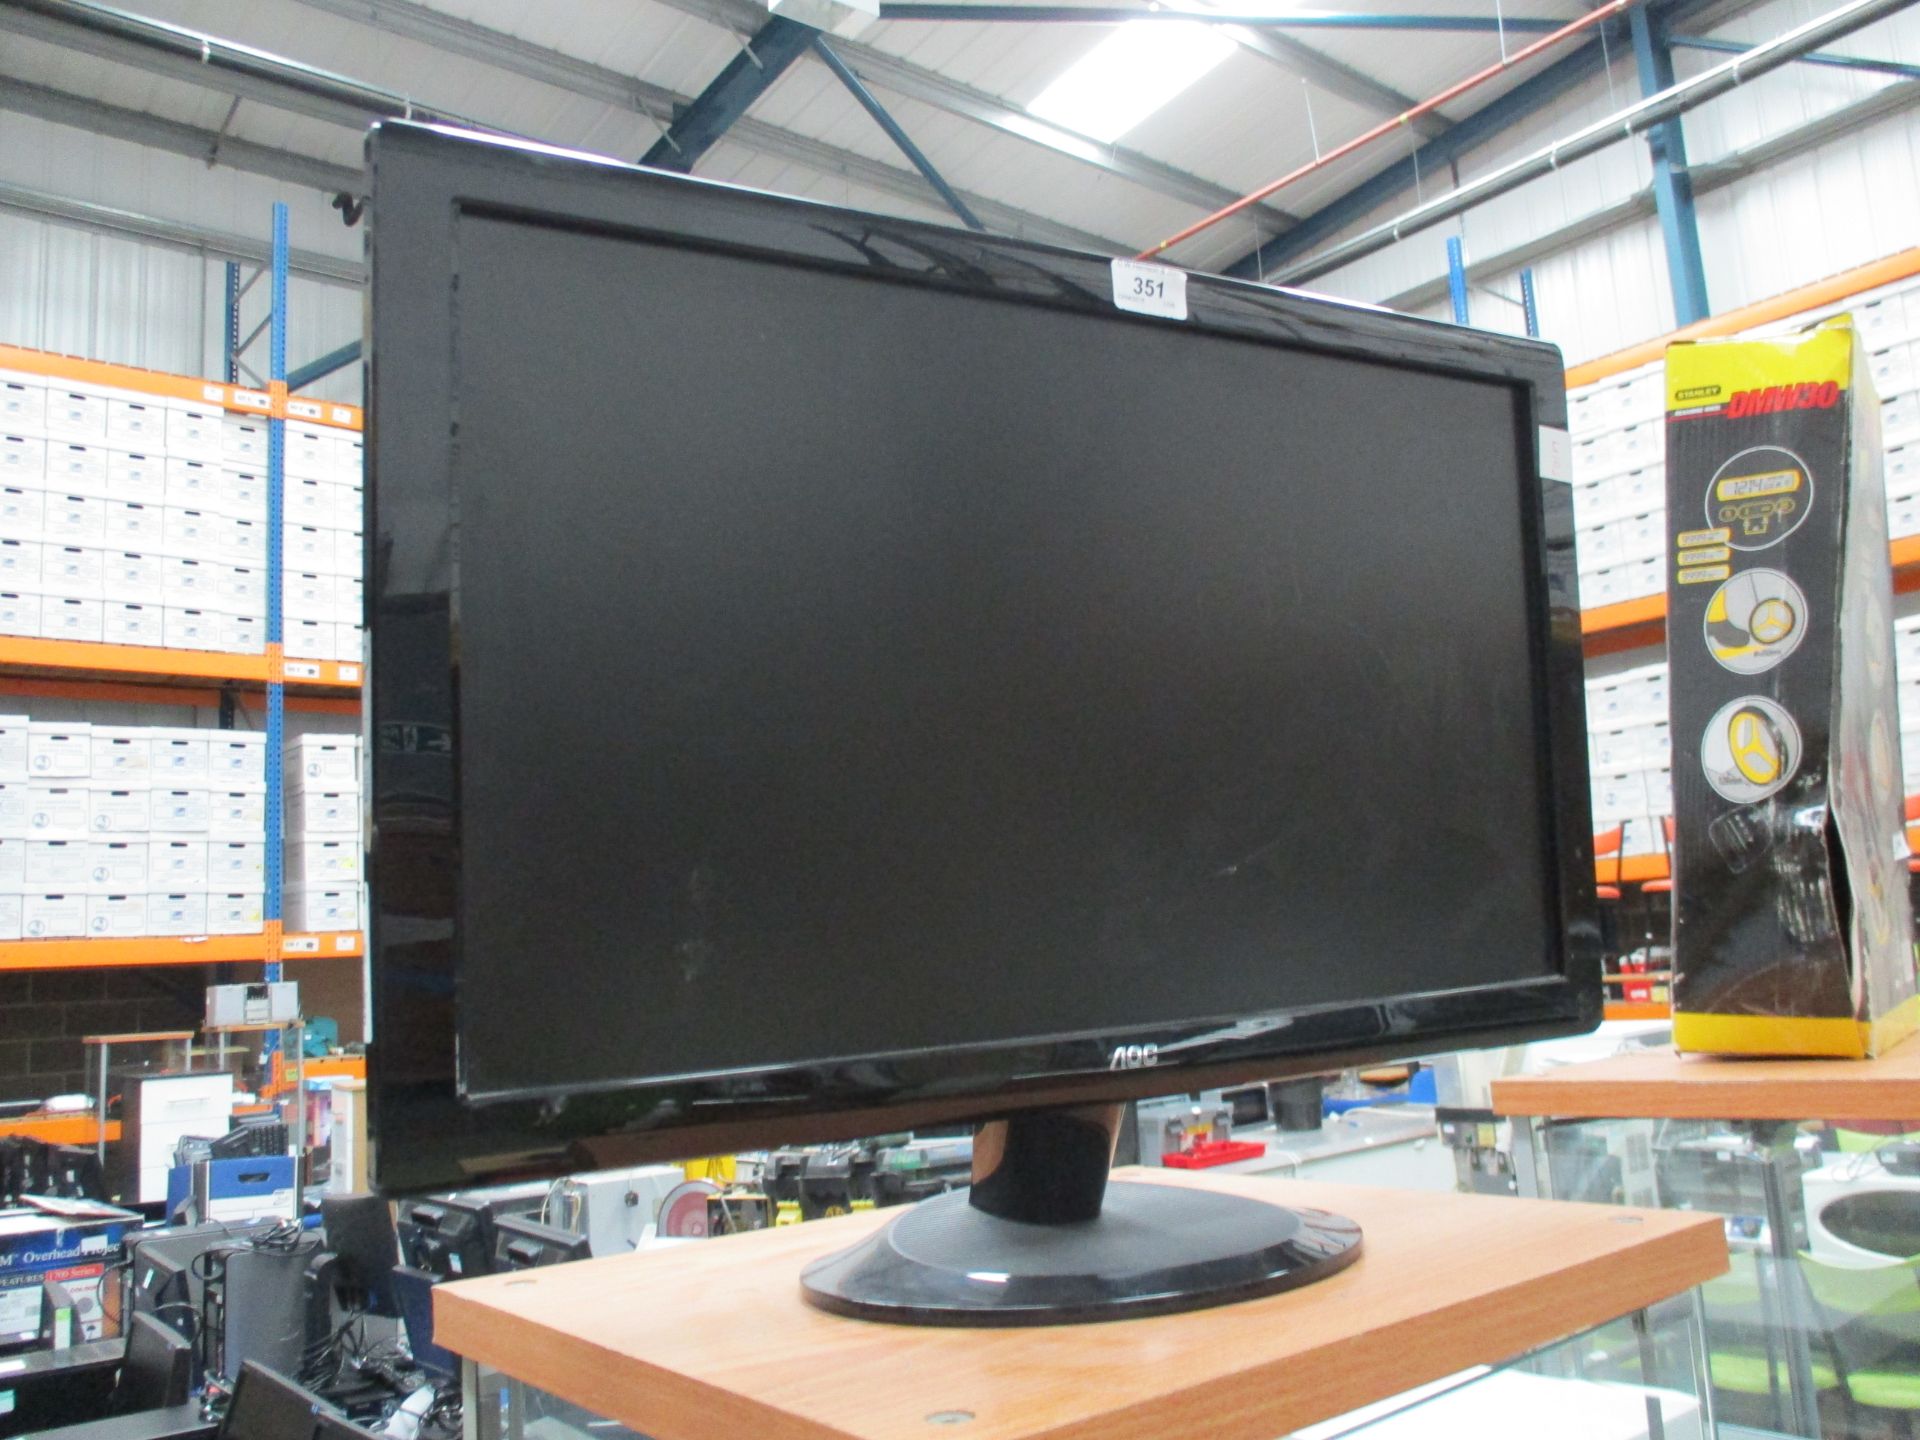 An NOC TFT24W80PSA 24" LCD monitor - power lead